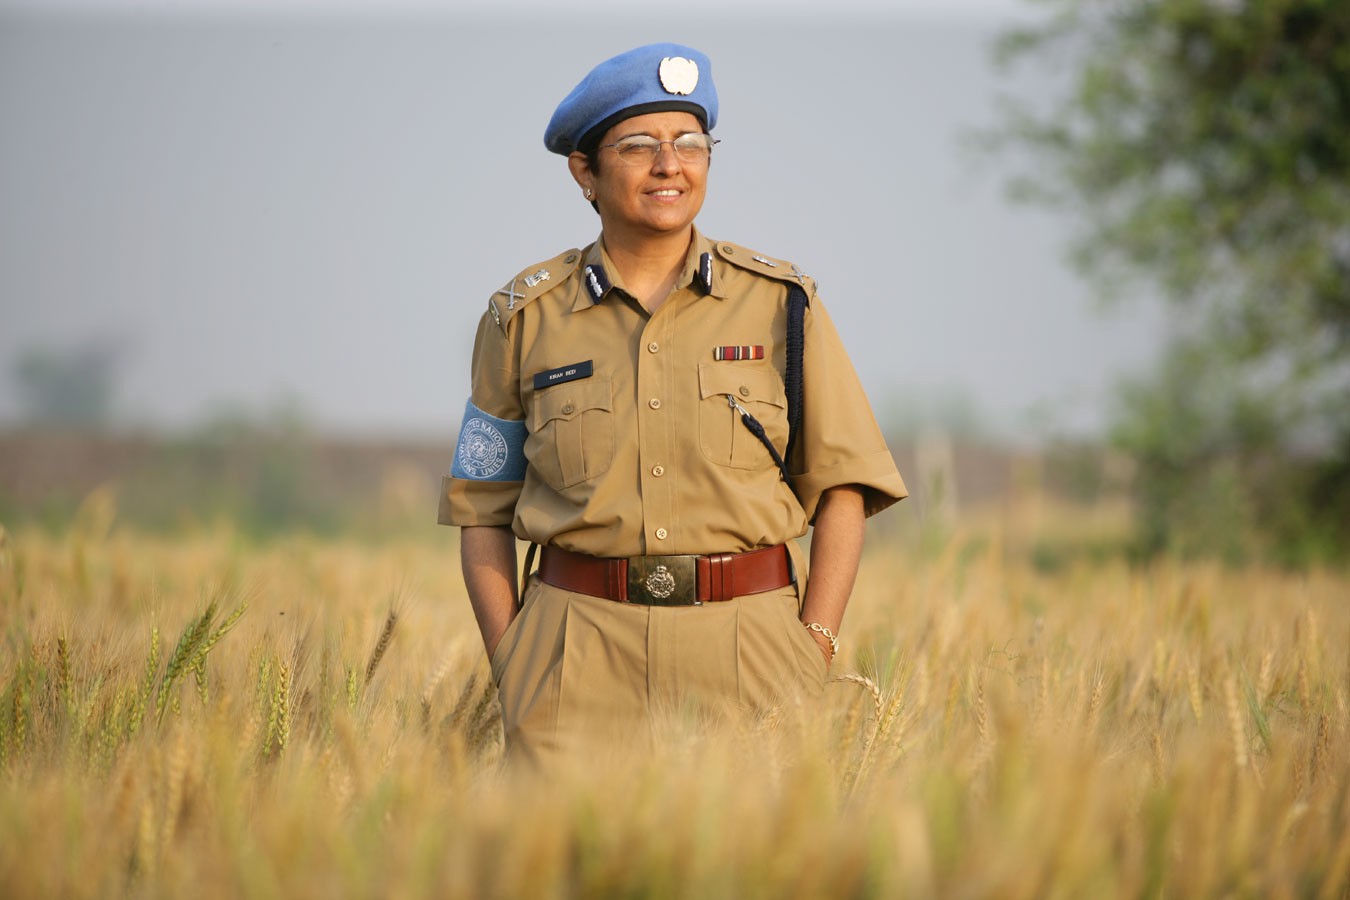 Half a century of advancing women's role in police: Meet Kiran Bedi, the first Indian and the first woman to head the UN Police Division | United Nations Police